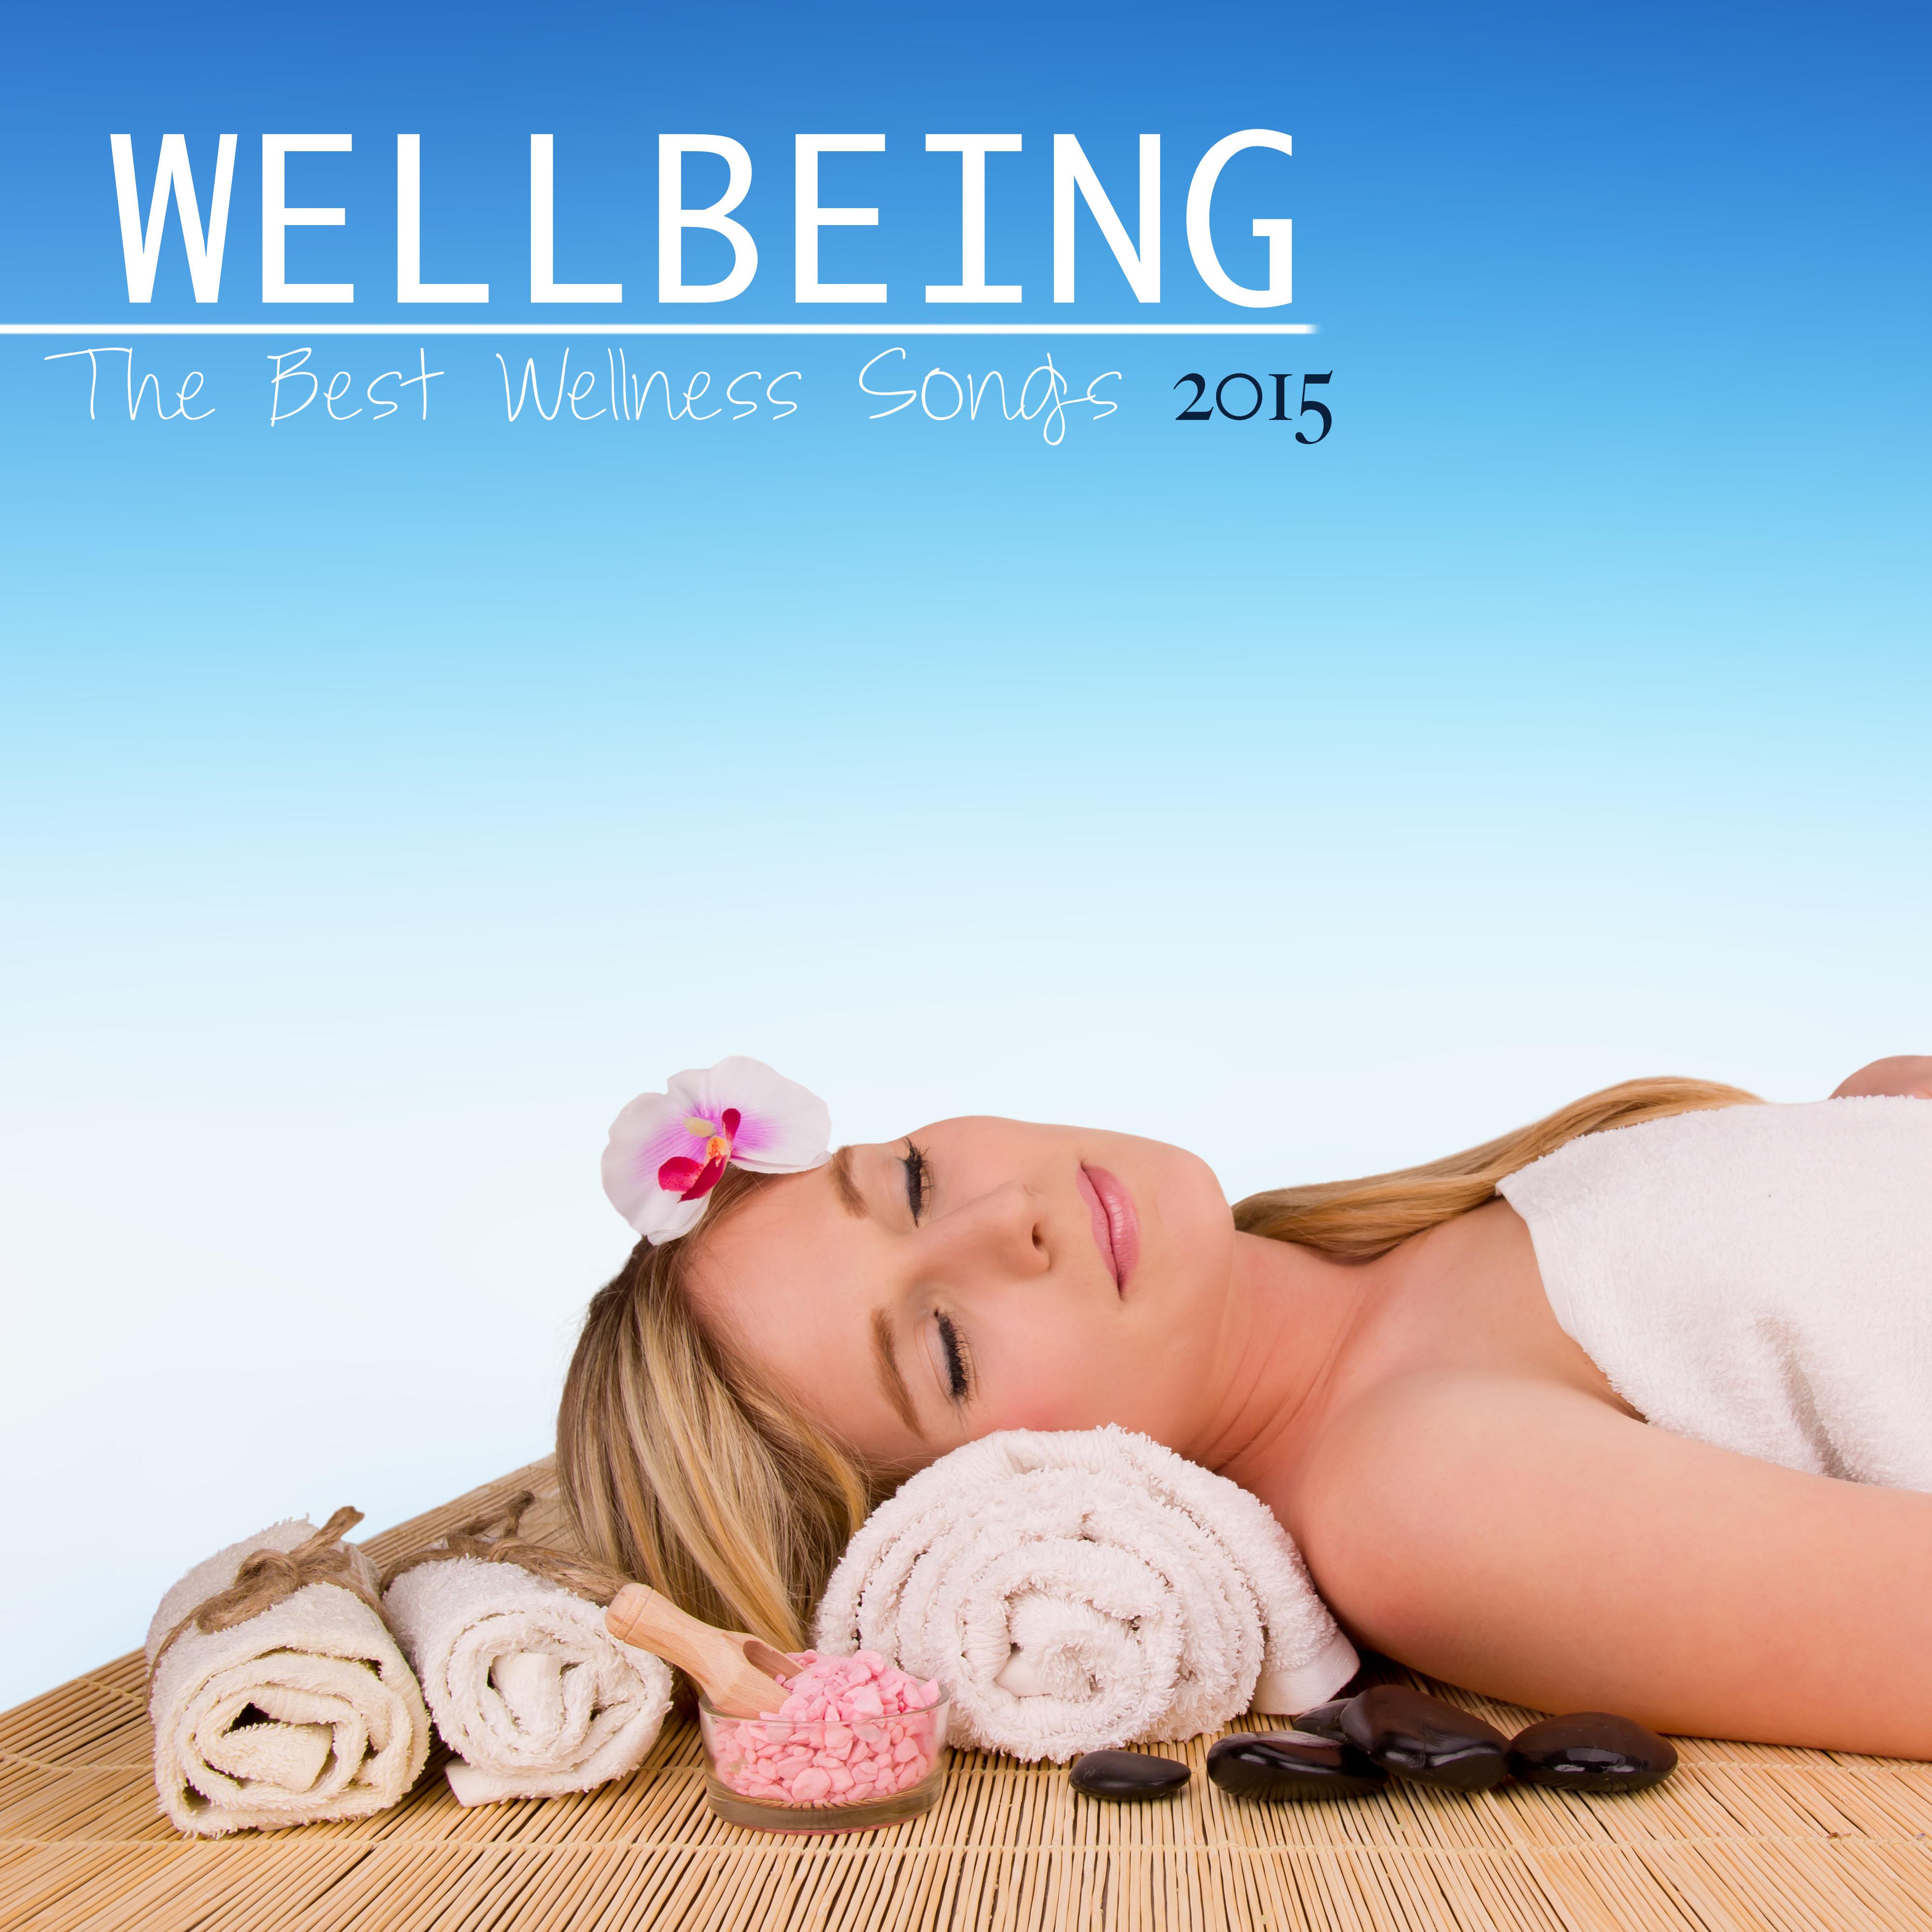 Wellbeing: The Best Wellness Songs 2015 for Meditation, Relaxation, Massage, Yoga, Reiki